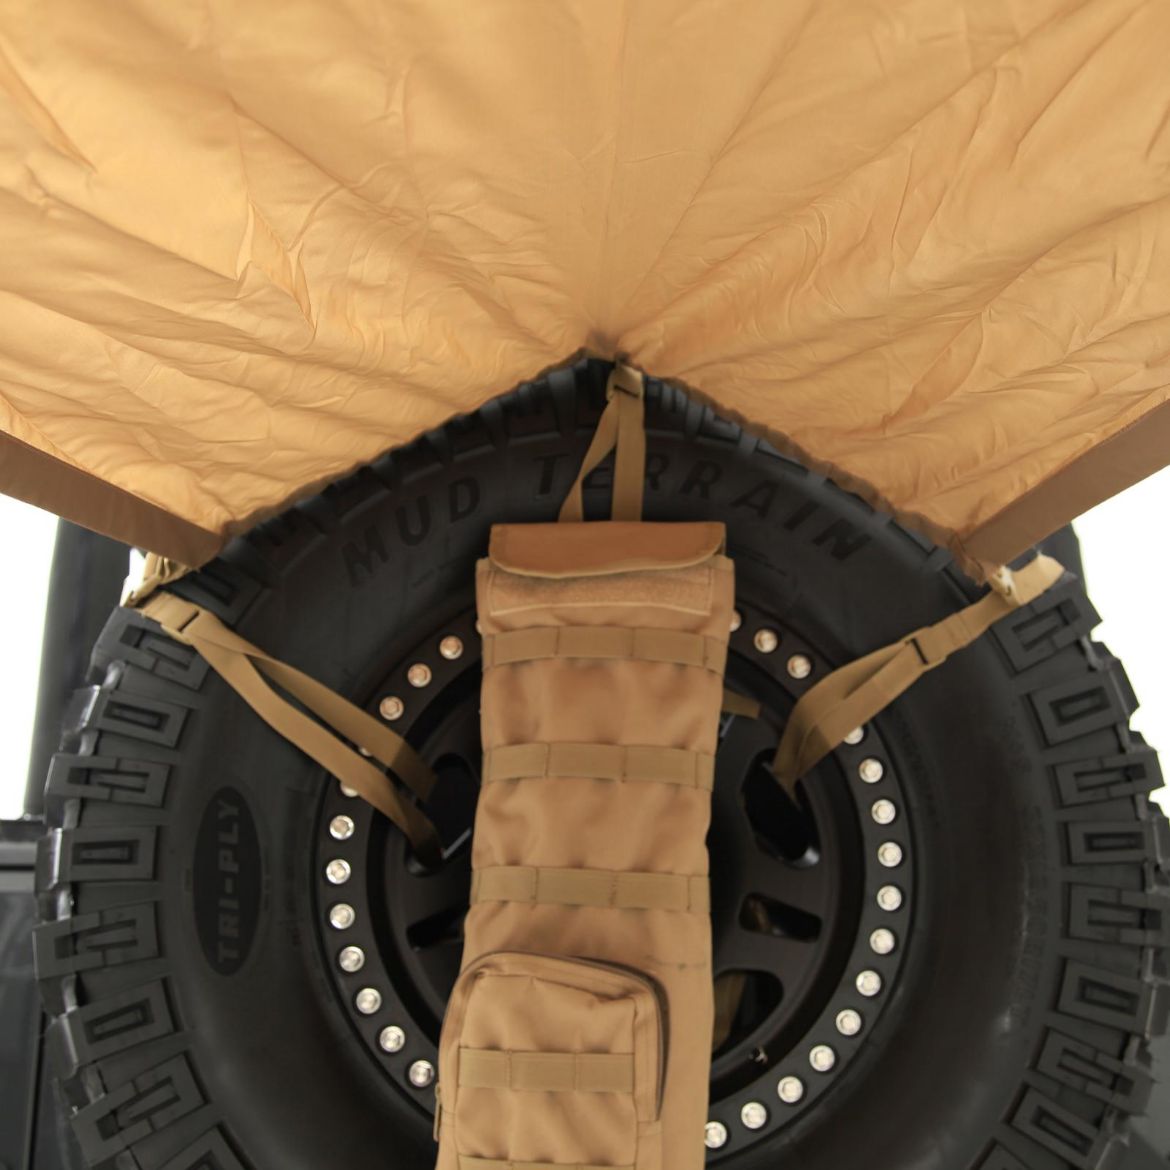 Picture of Gear Trail Shade 10 X 6 Fits Up To A 37 Inch Tire Coyote Tan Smittybilt